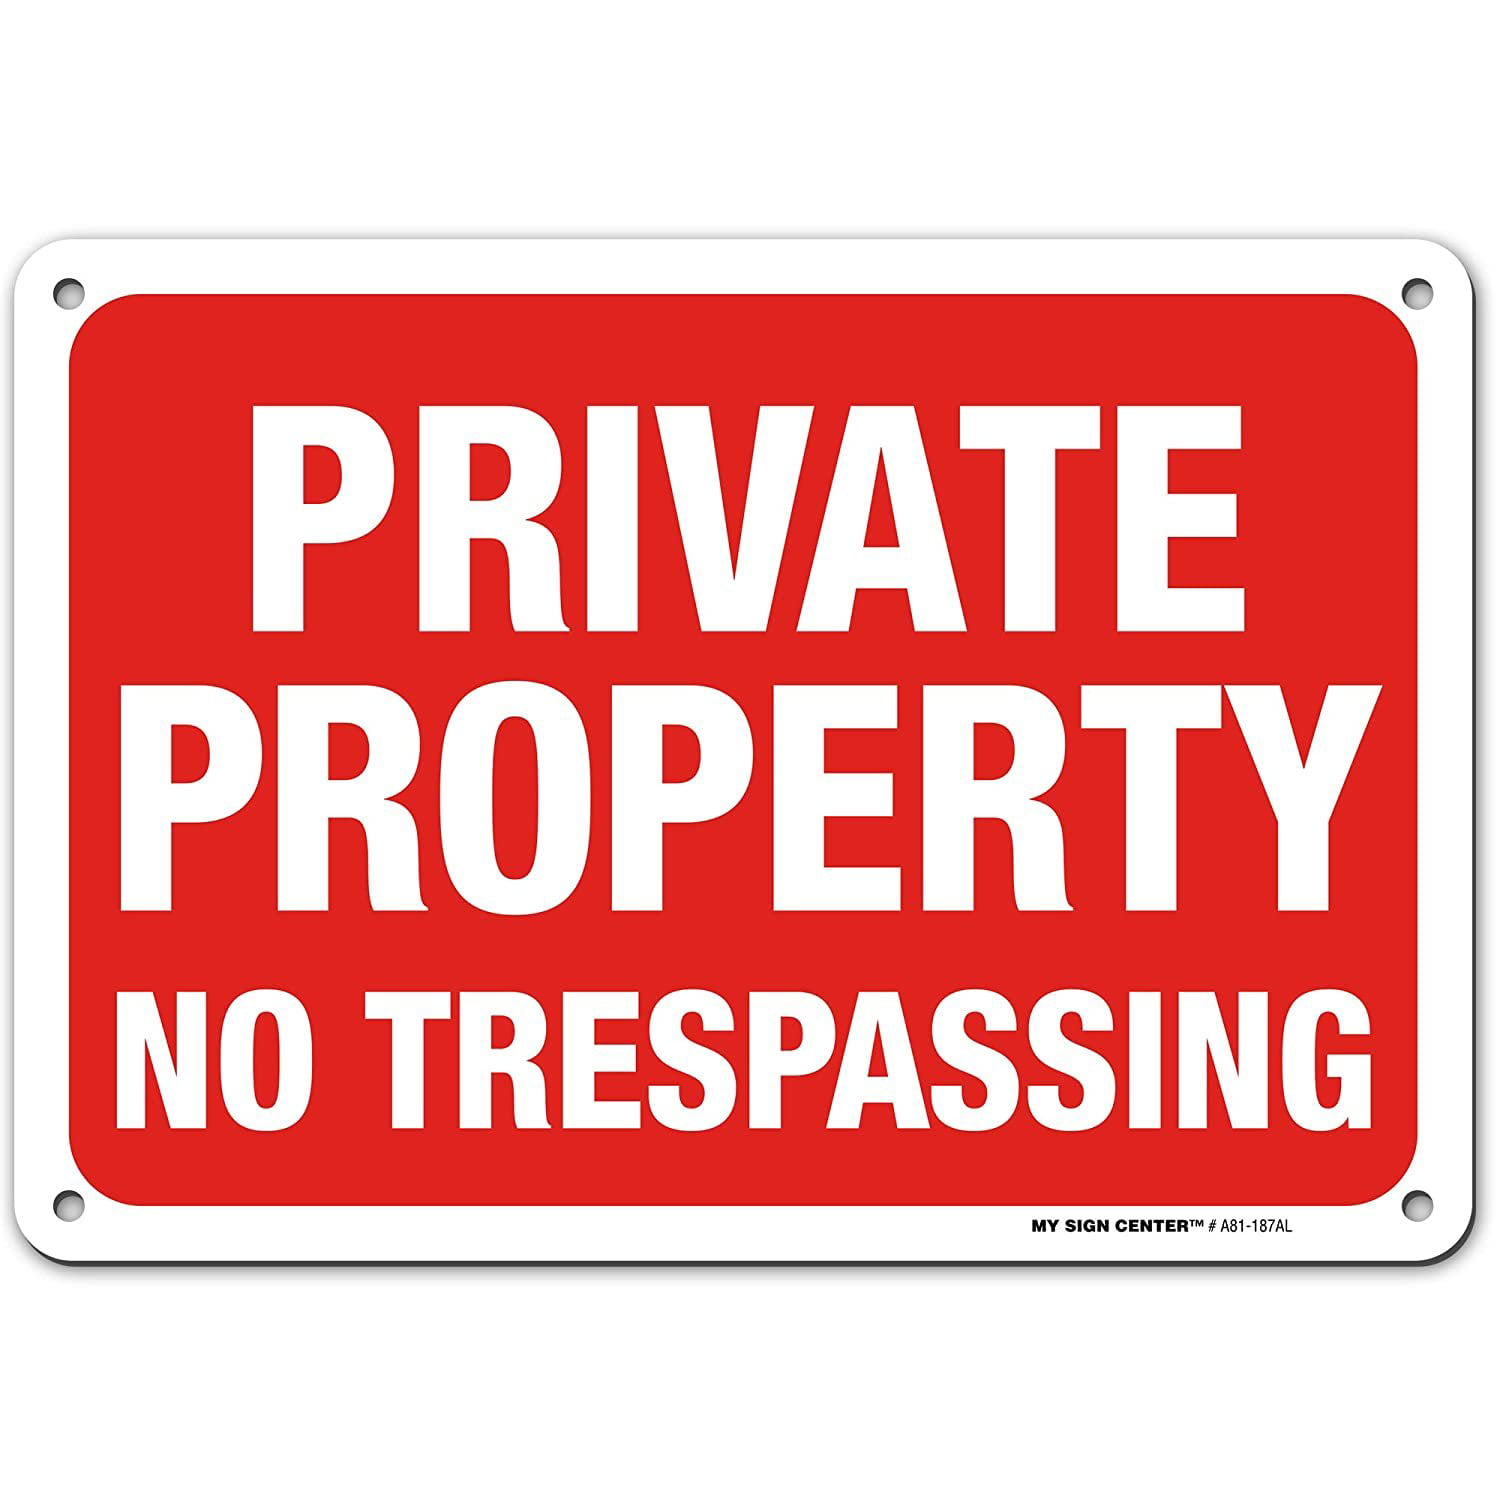 Private Property No Trespassing Warning 8"x12" Aluminum Sign